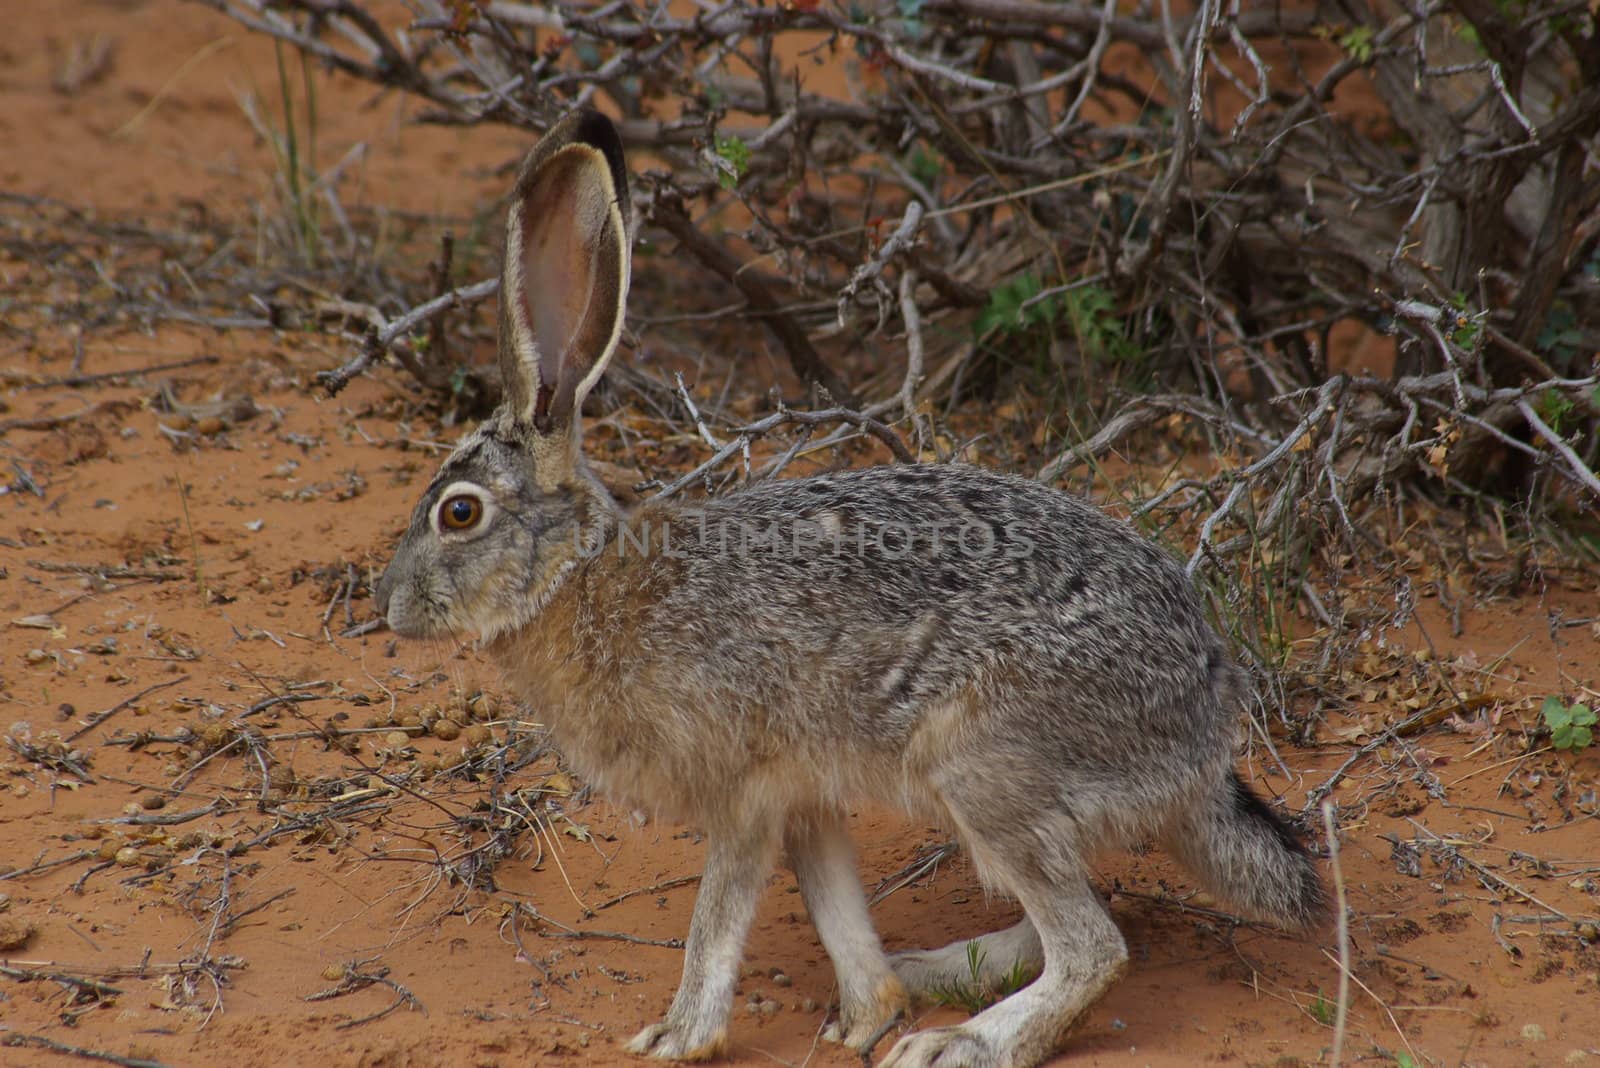 Close-up of a jack rabbit in the desert